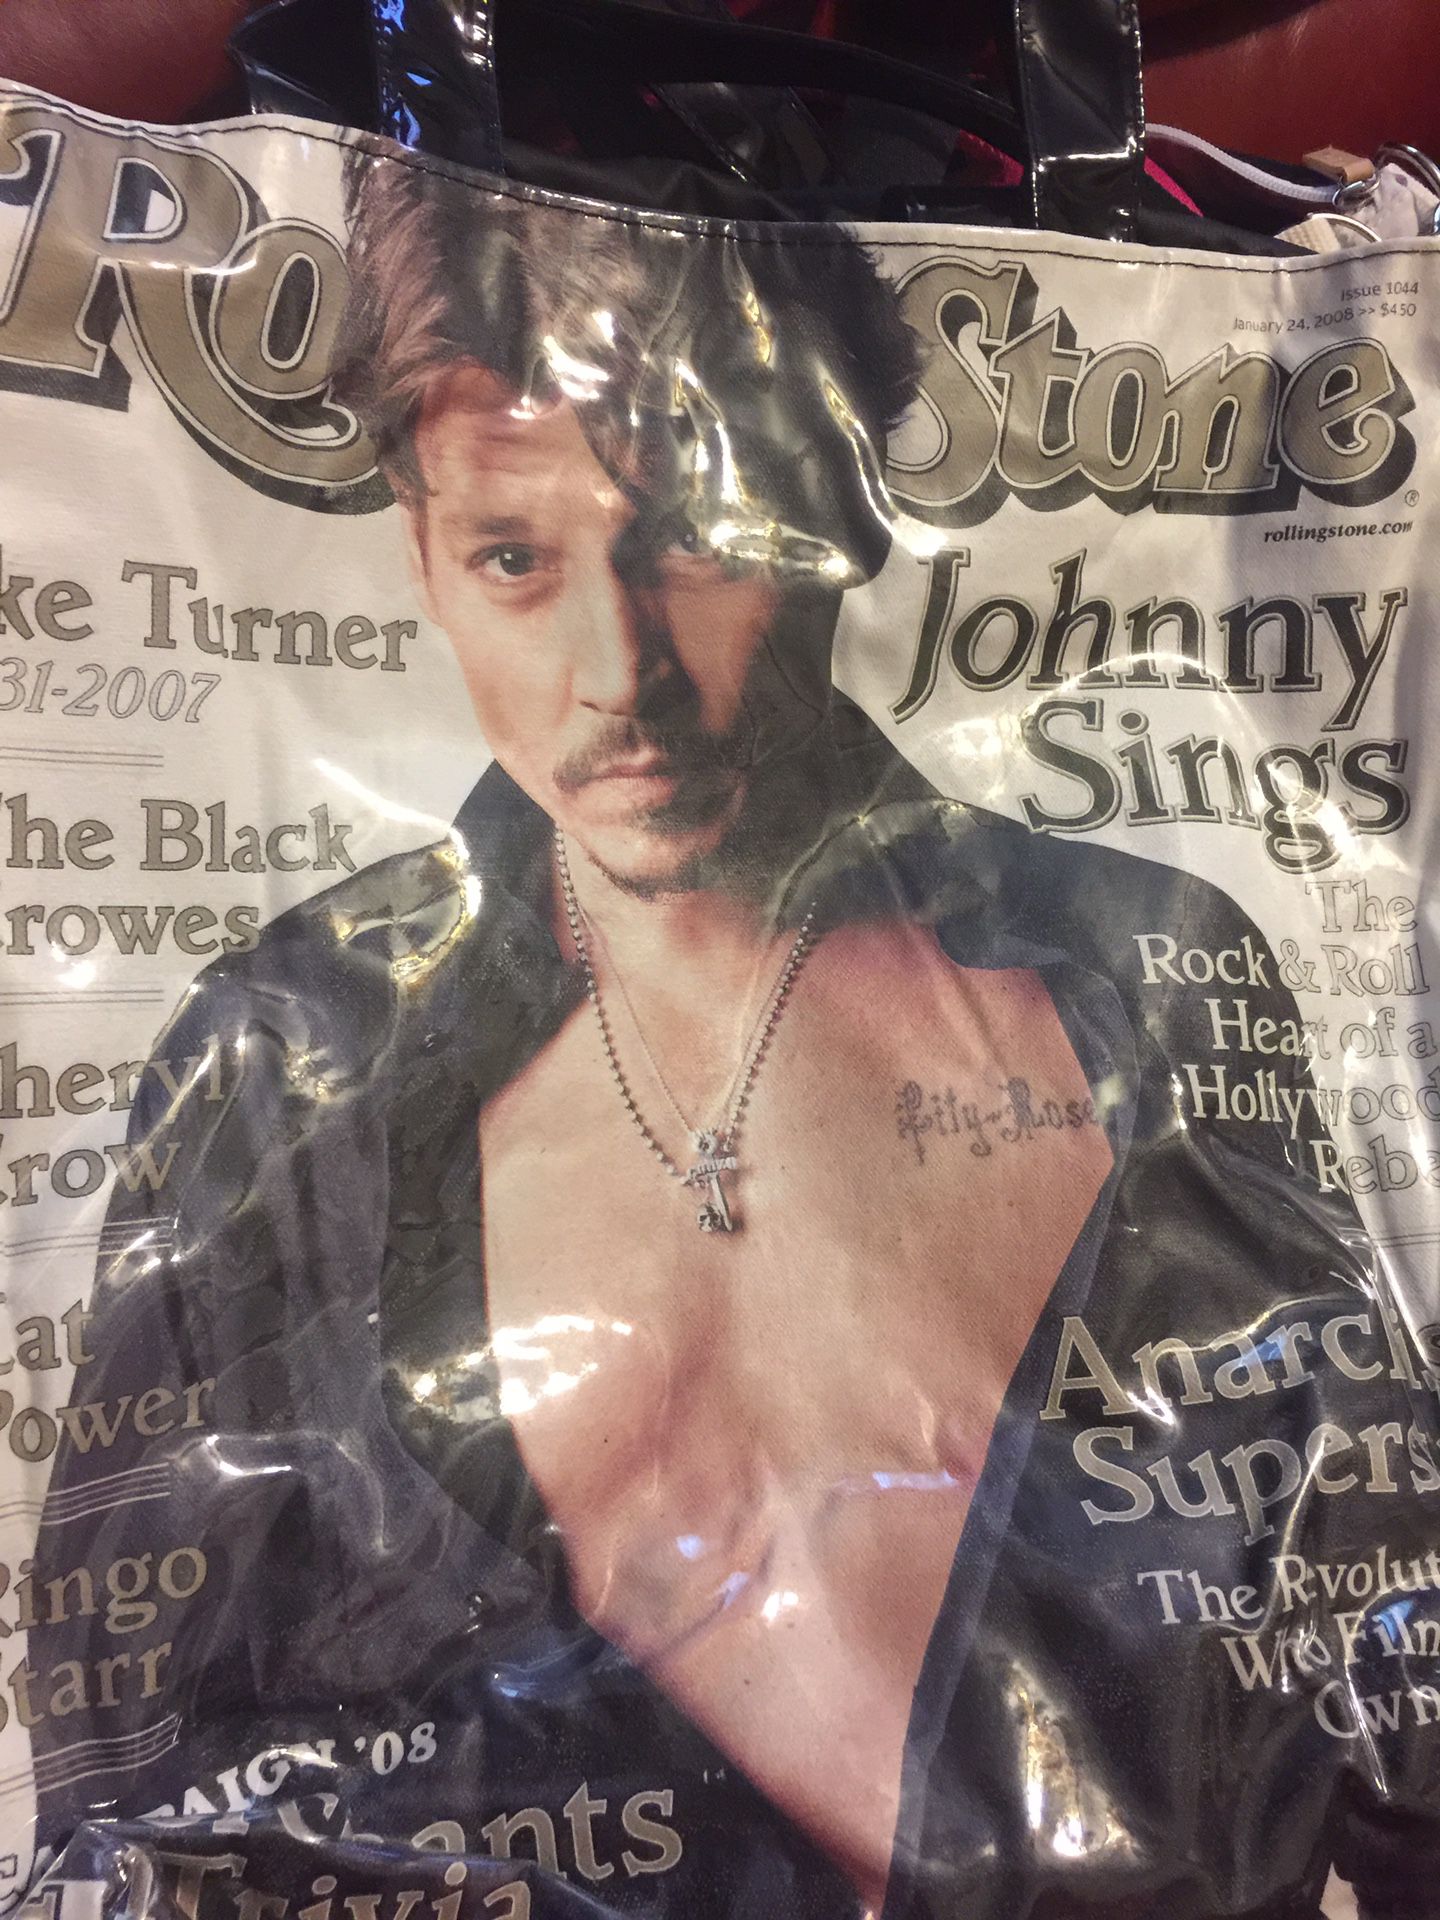 Rolling stone bags